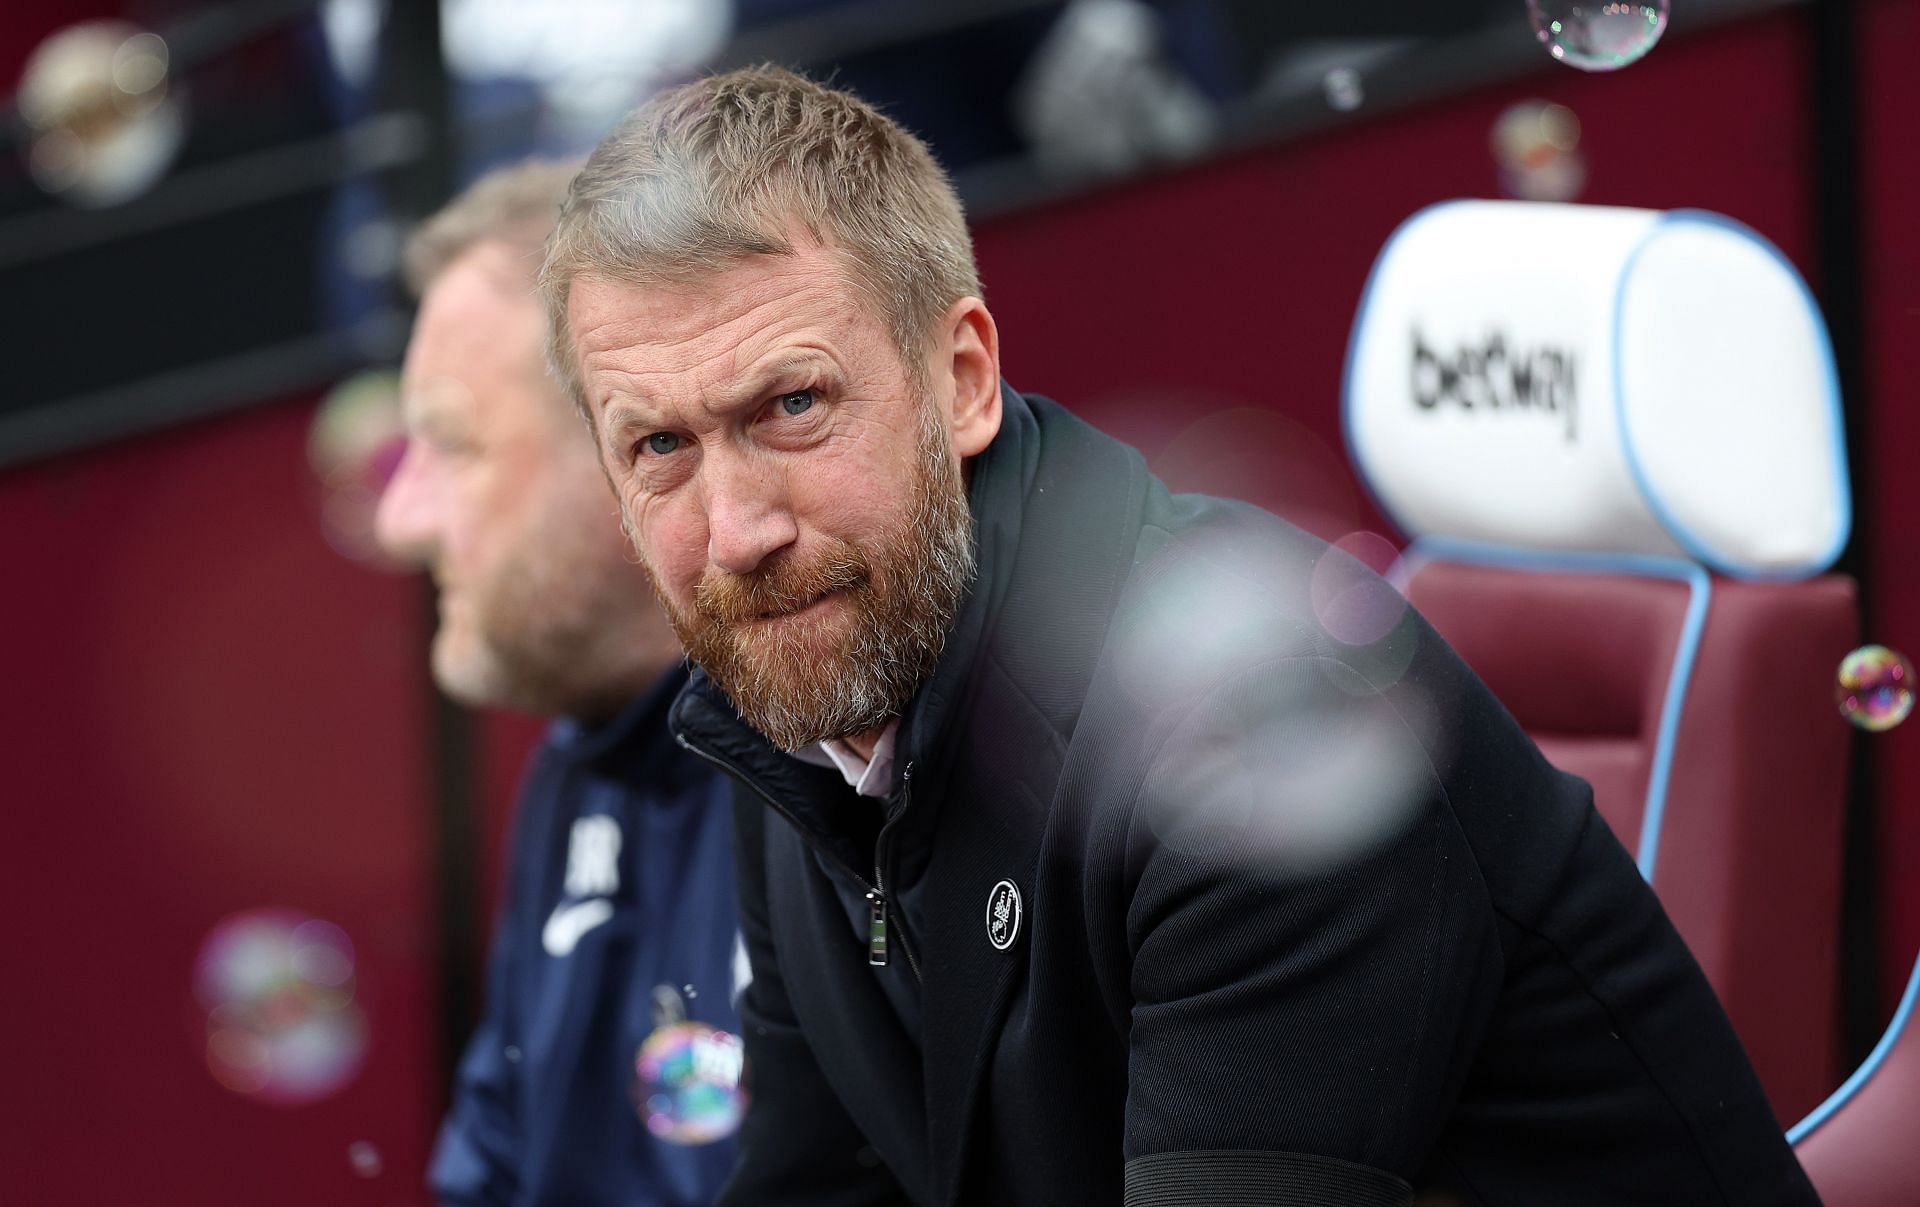 Graham Potter is yet to take up his next assignment.